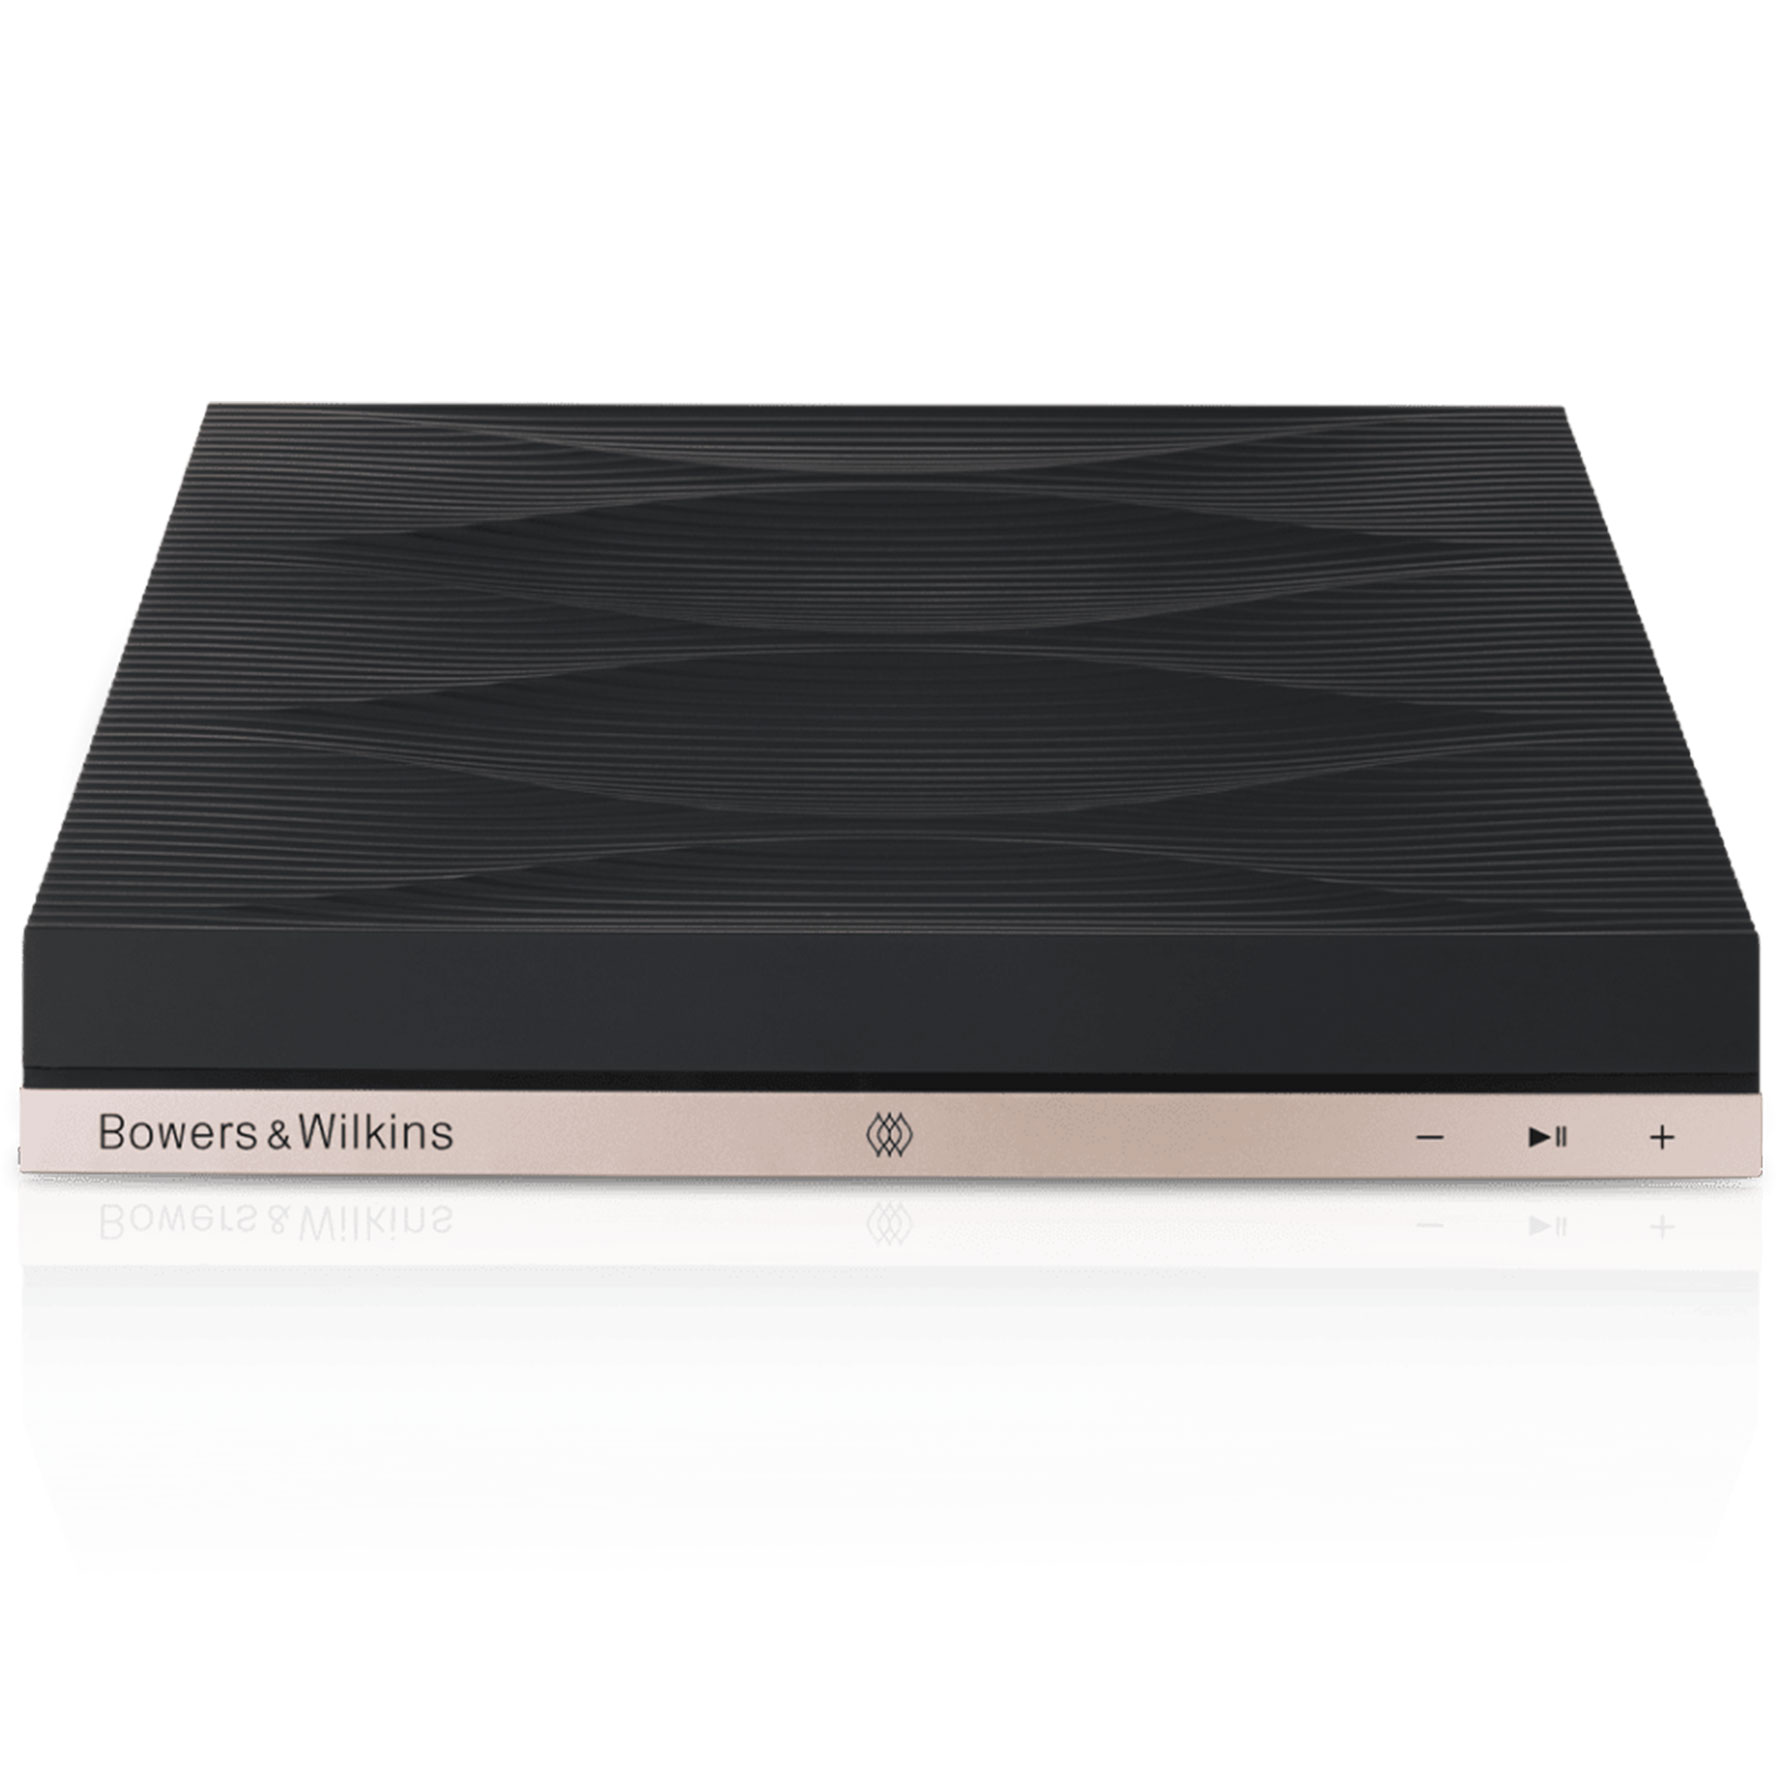 Bowers WinkinsFormation Audio Give your hi fi a whole new dimension 2